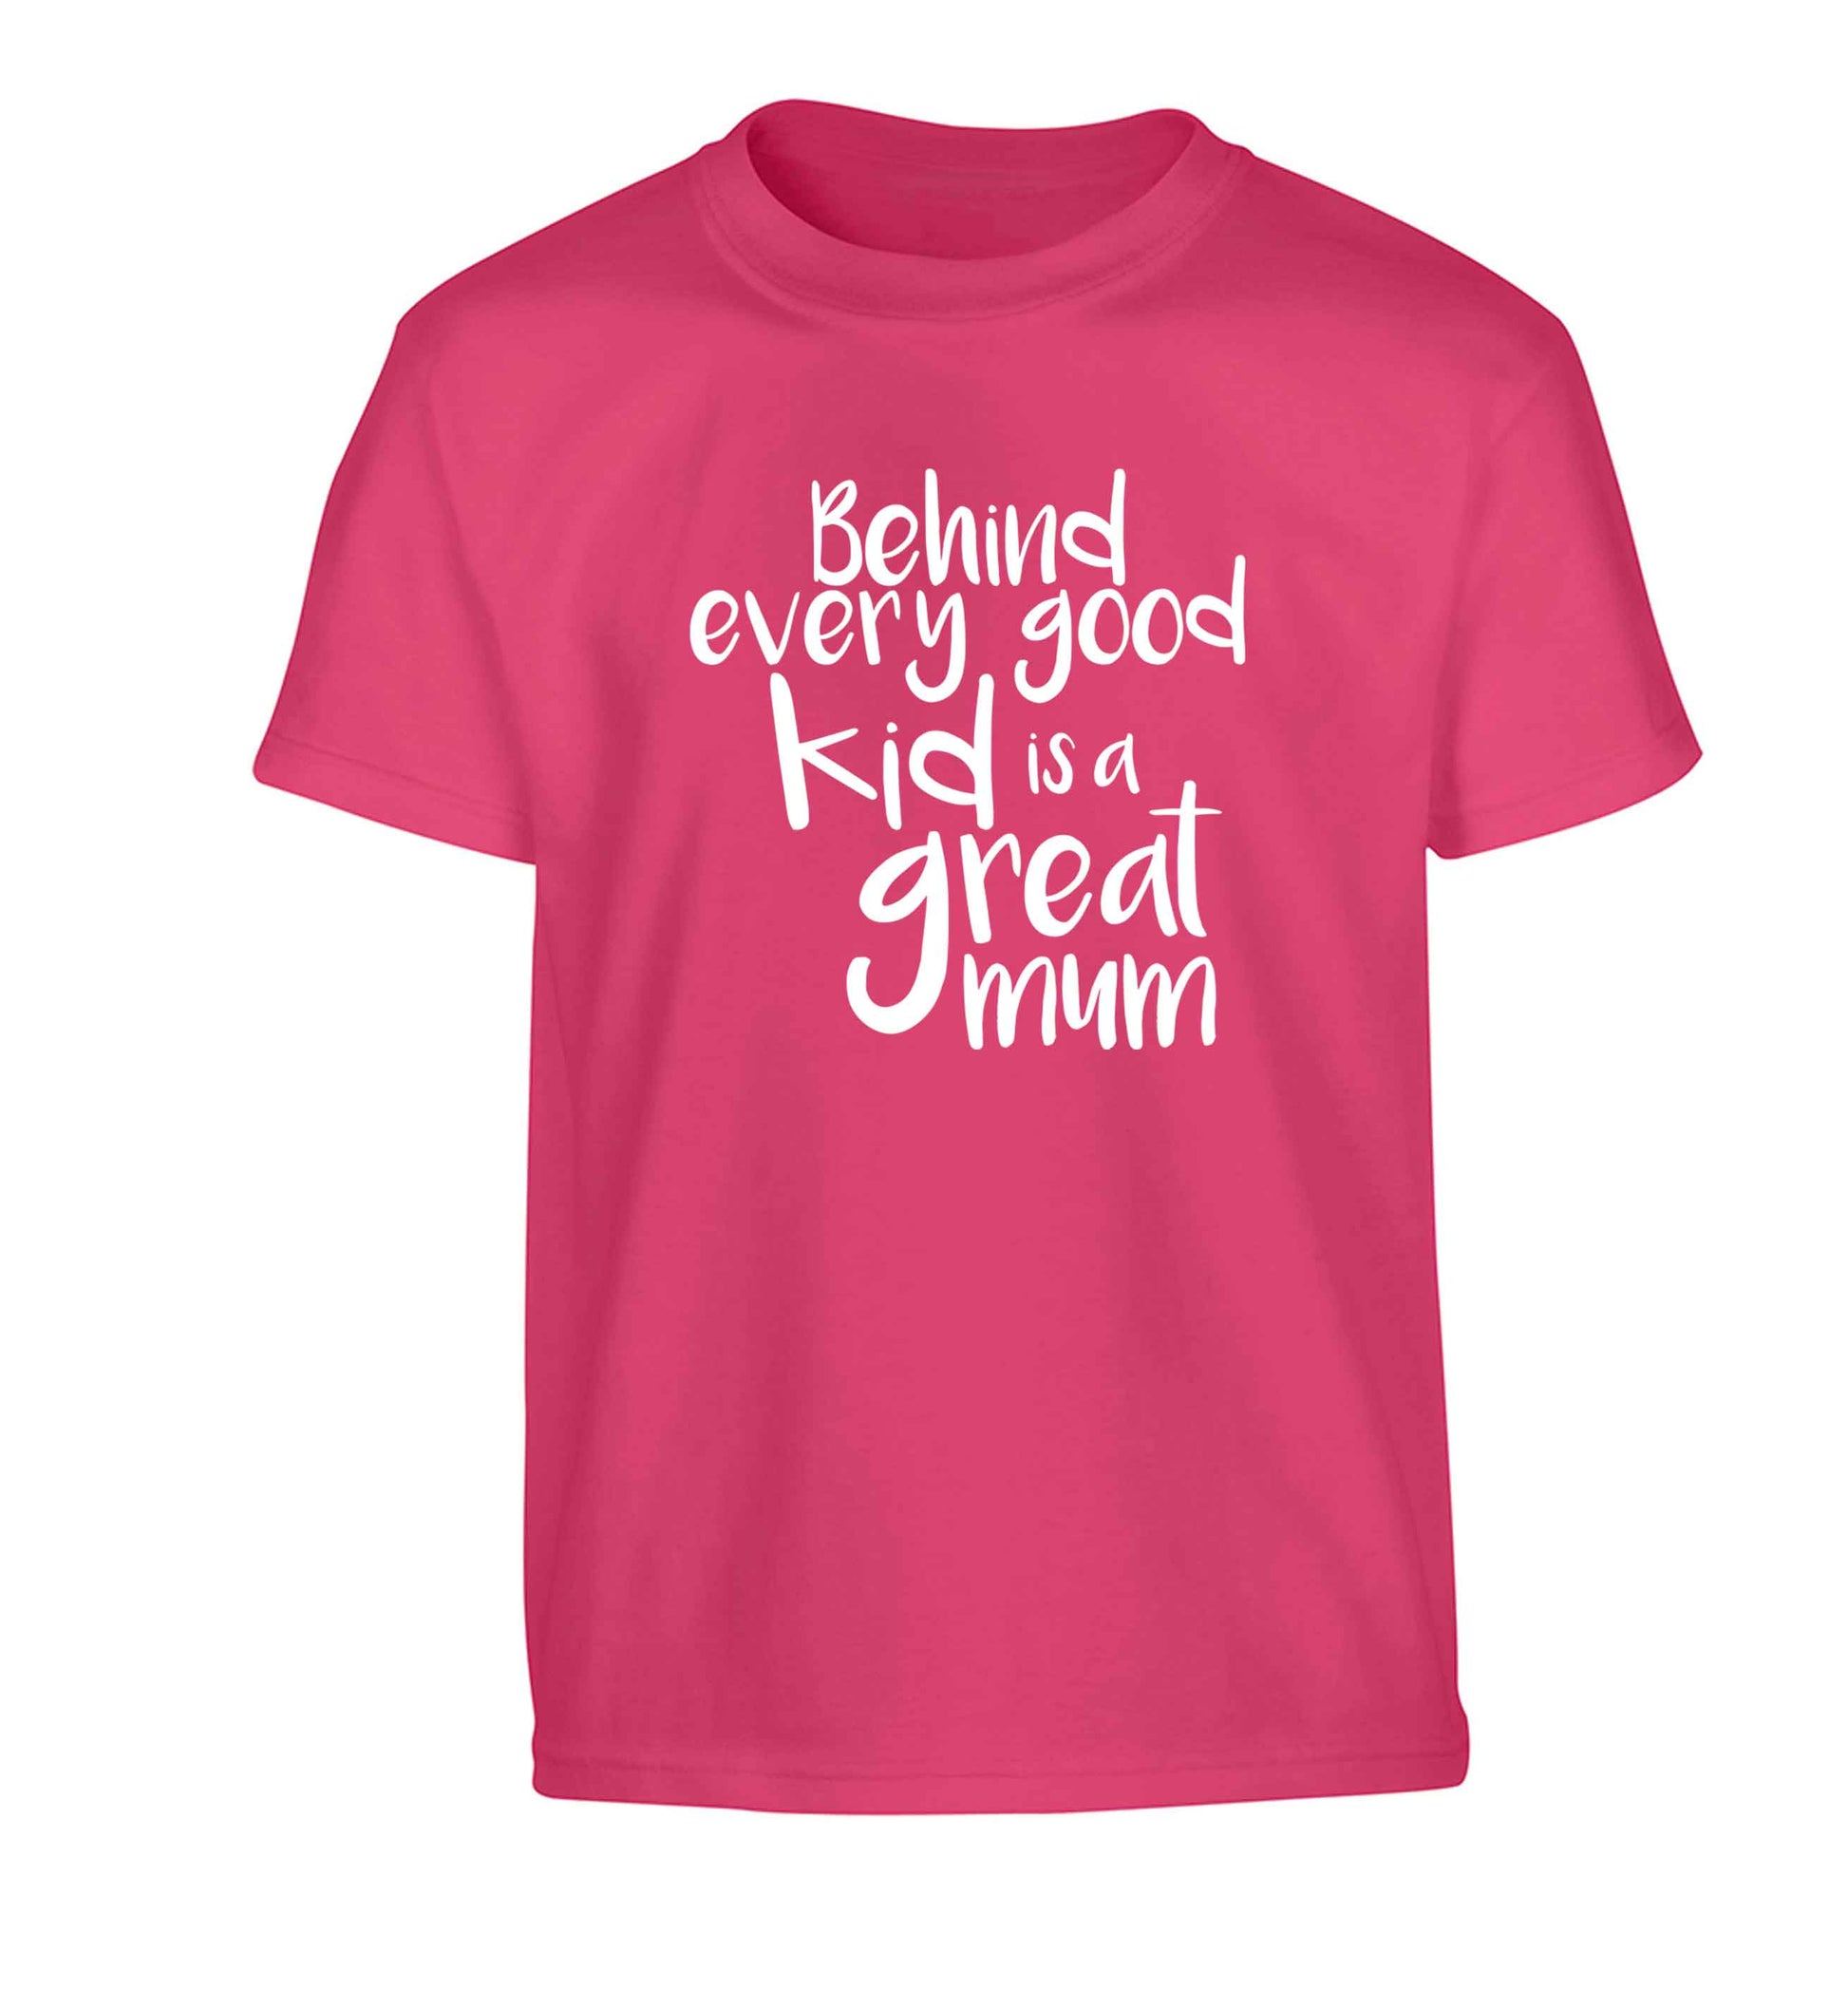 Behind every good kid is a great mum Children's pink Tshirt 12-13 Years